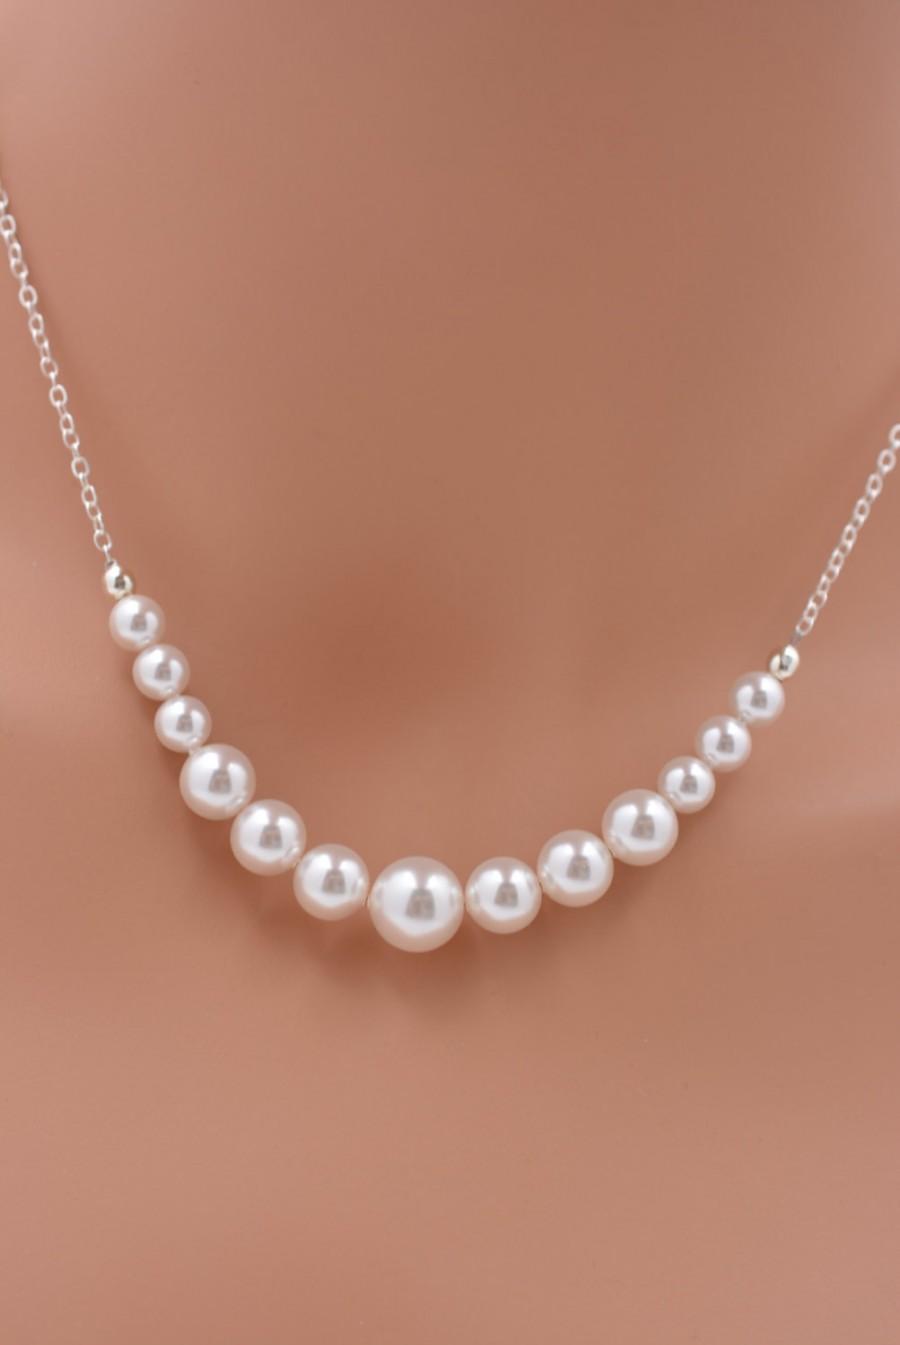 Hochzeit - Set of 6 Bridesmaid Pearl Necklaces, Silver and Pearl Bridesmaid Necklaces, Pearl Backdrop Necklace 925 Sterling Silver Necklace 0237